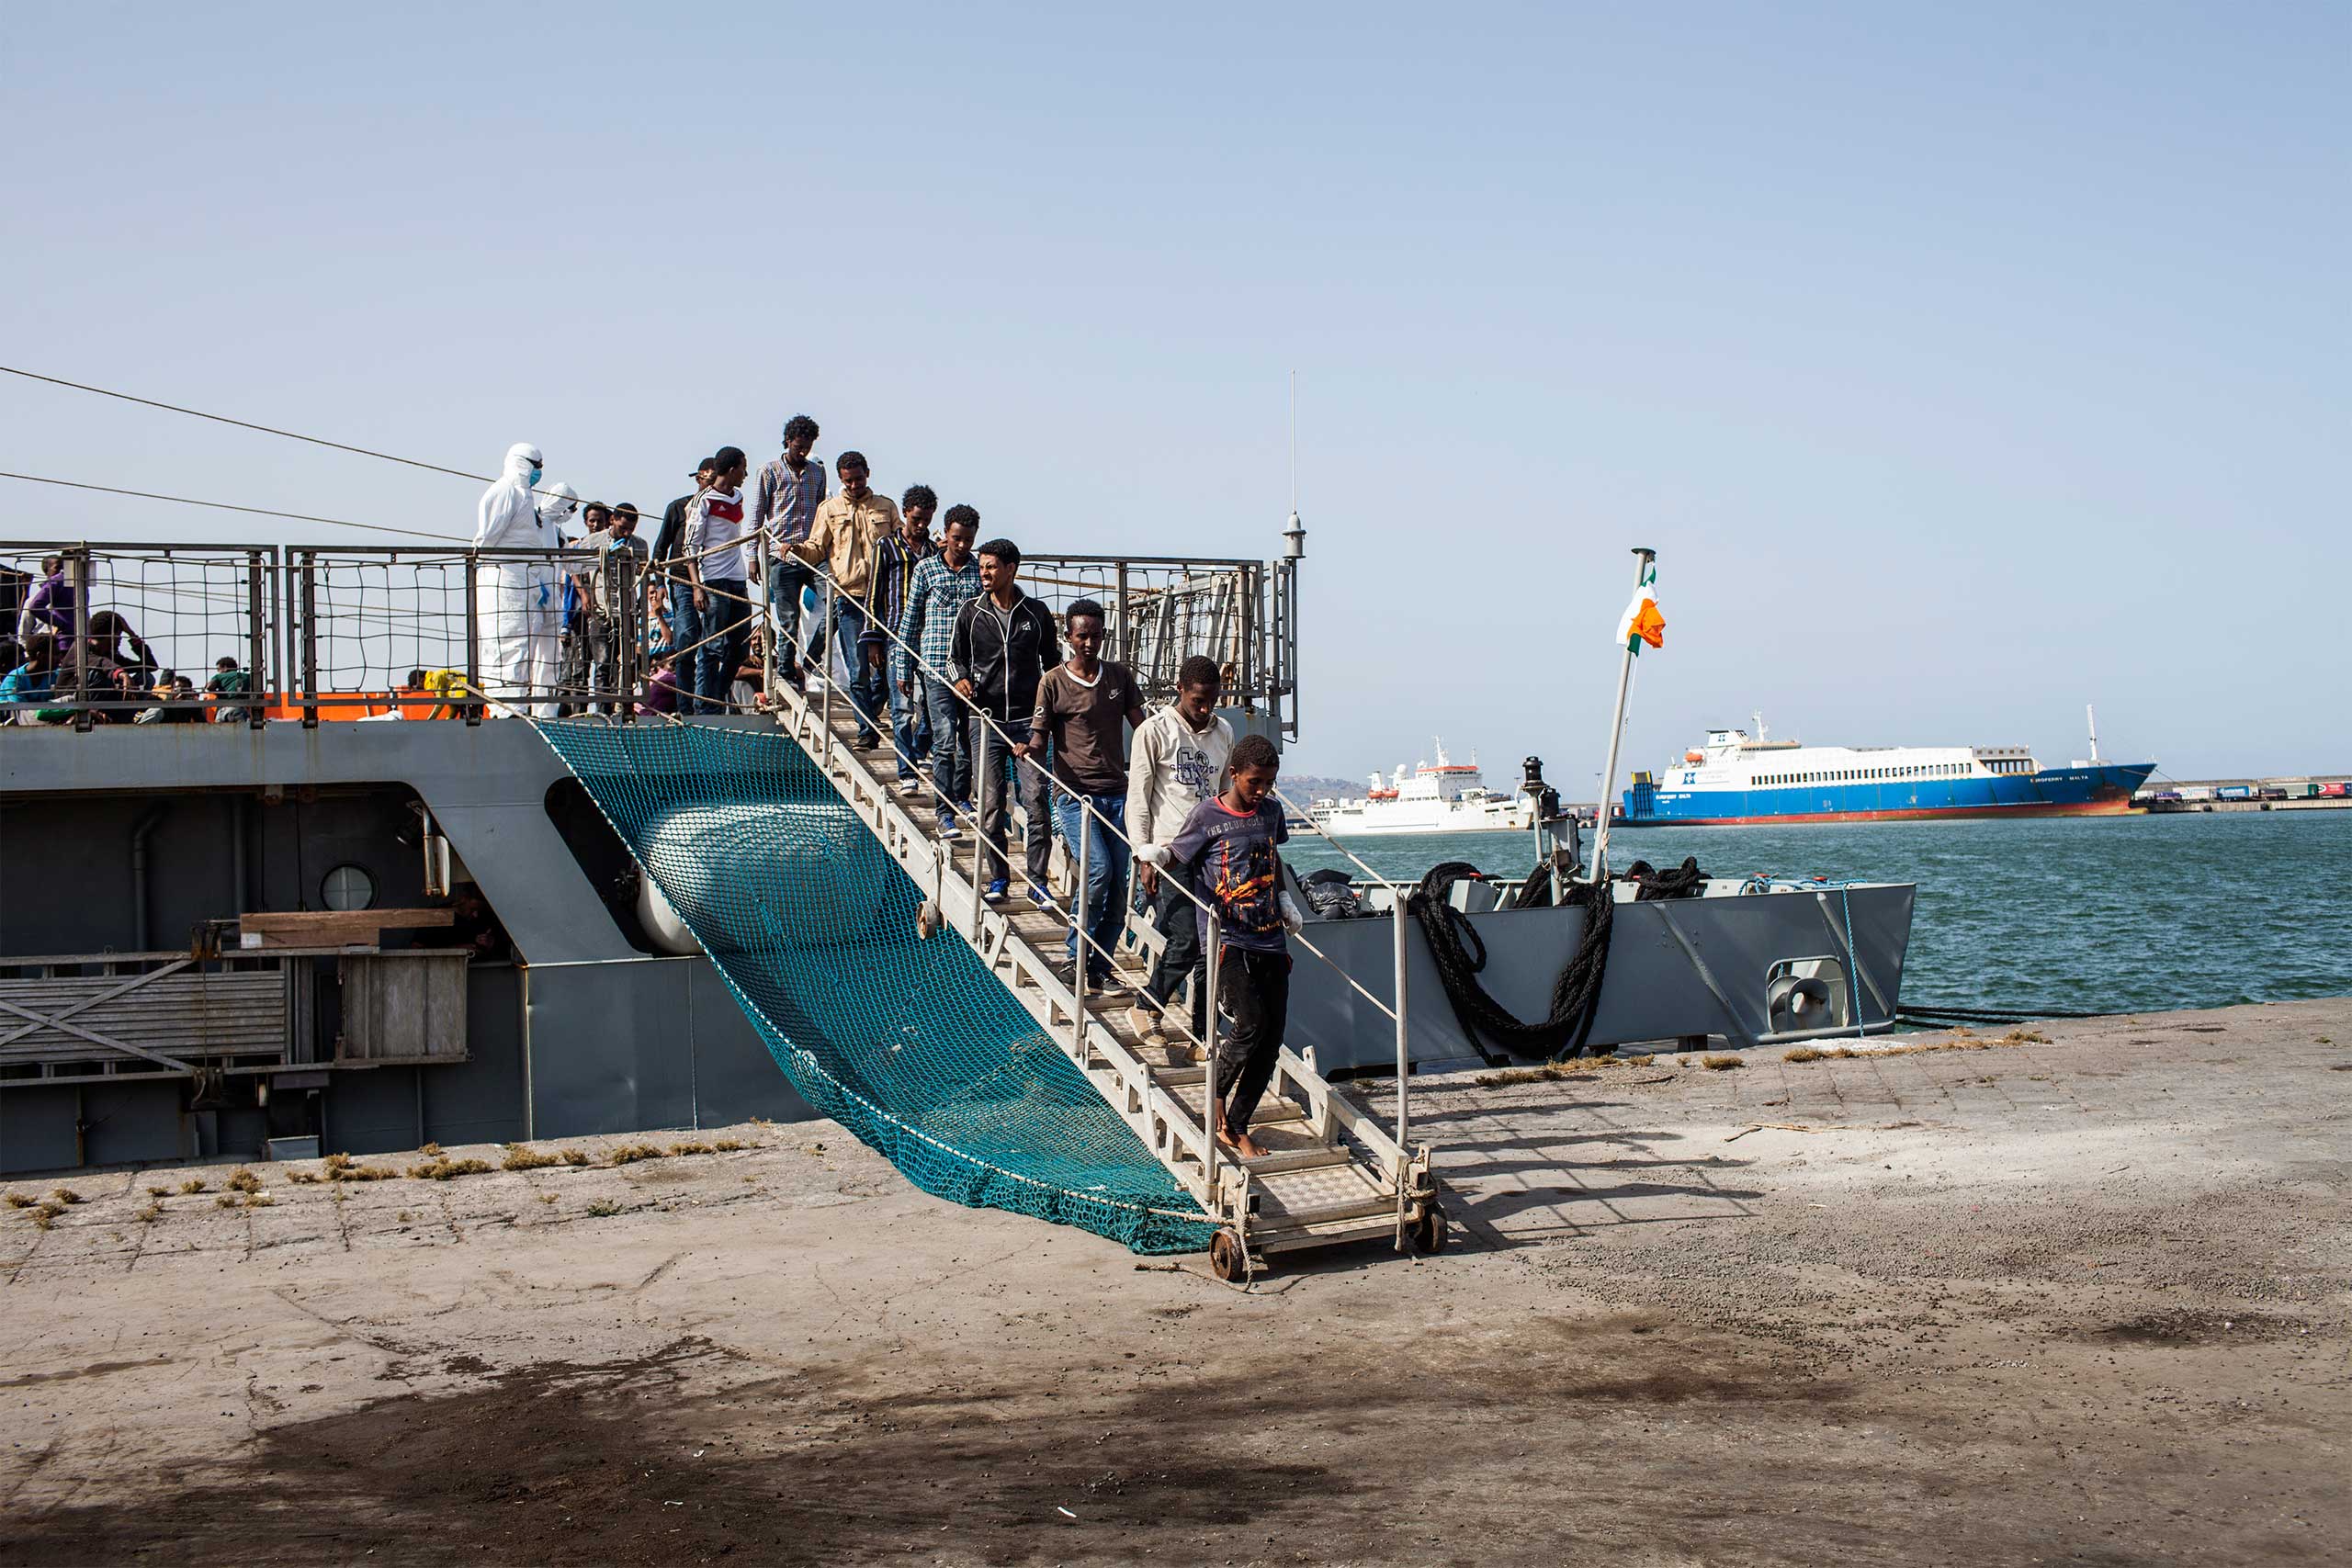 African people, mostly coming from Sudan and Eritrea, land in the Sicilian city of Catania. June 2015.